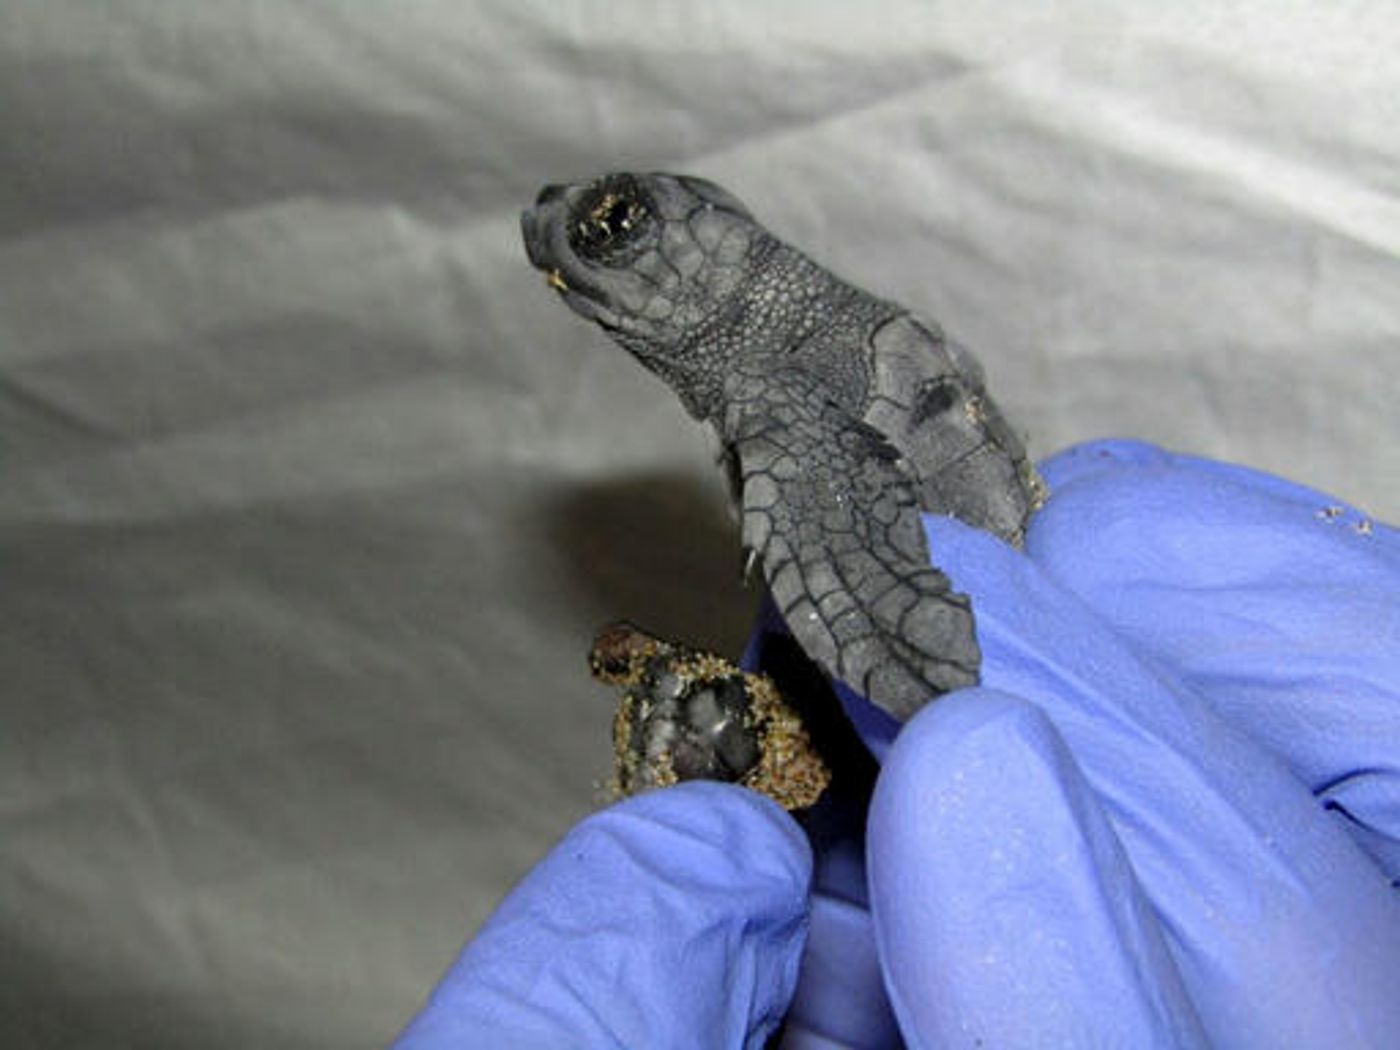 A conjoined twin attached to a loggerhead turtle from Italy.